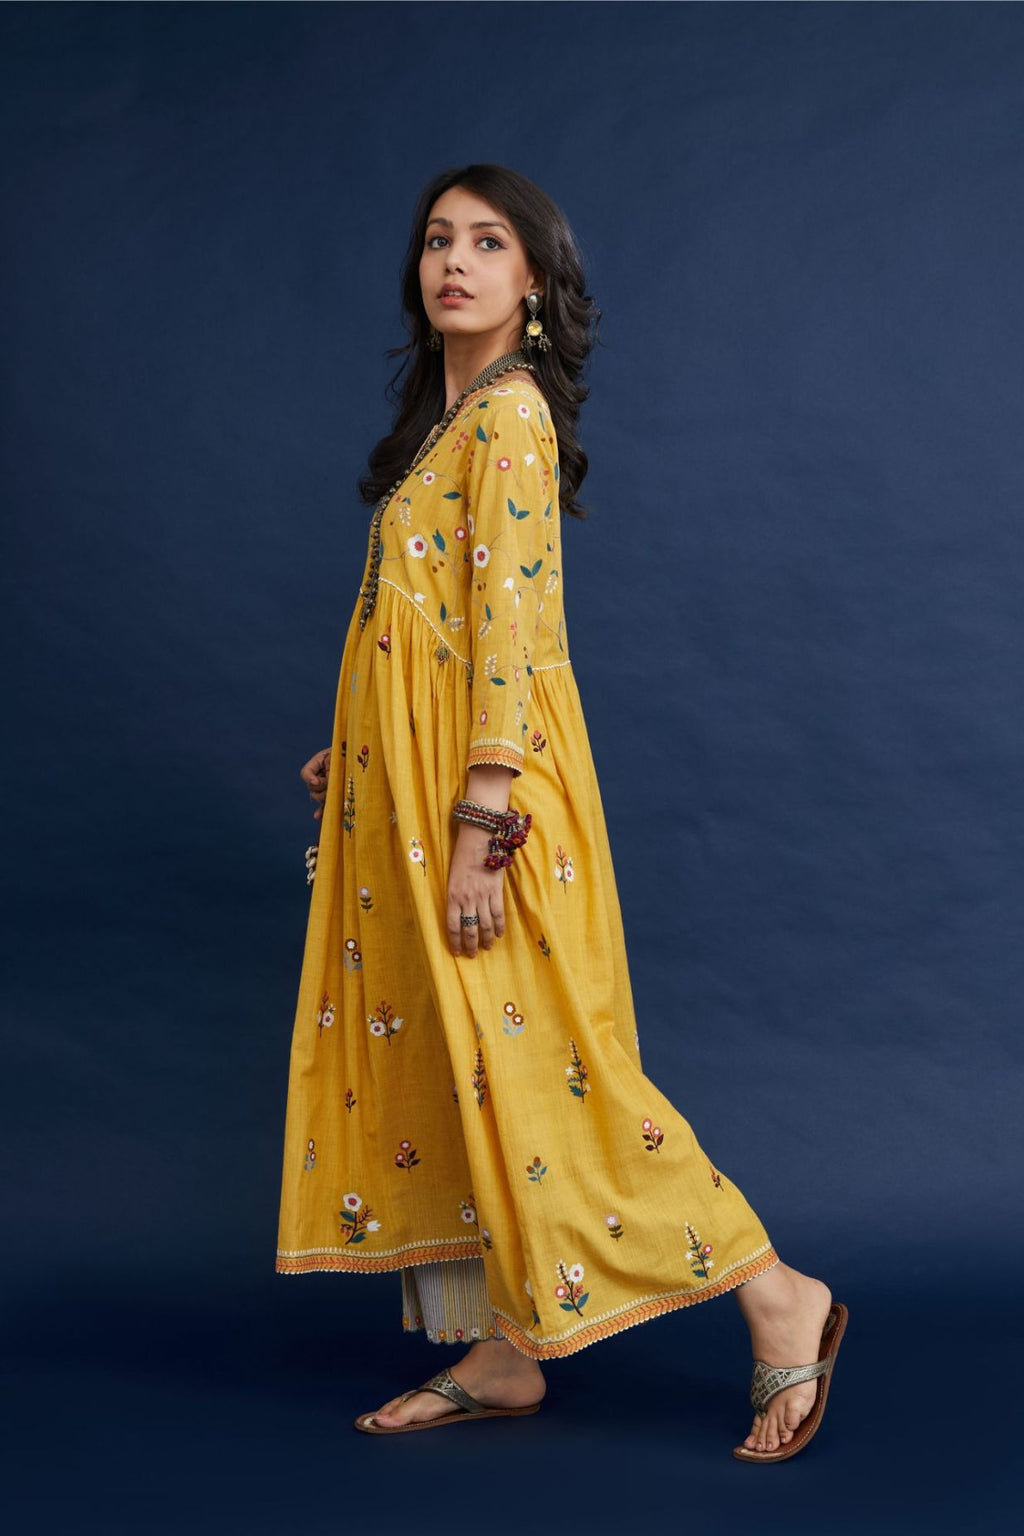 Handspun hand-woven cotton kurta with wavy empire waistline and gathers, highlighted with all-over multi colored thread embroidery, paired with hand block printed cotton pants with multi colored flower embroidery at hem